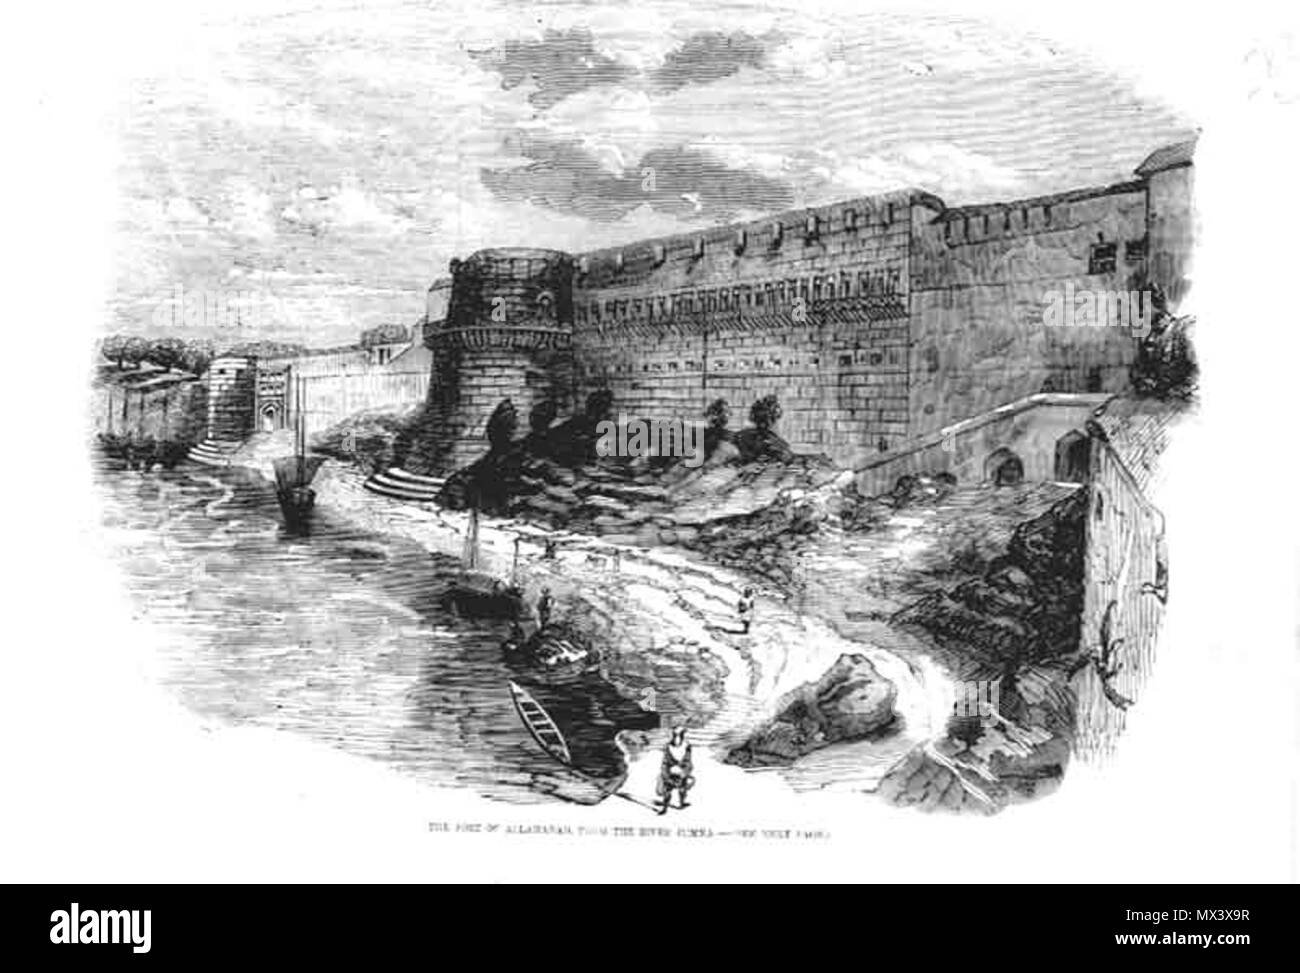 . English: Fort of Allahabad'*, 1857. Views from the ILLUSTRATED LONDON NEWS and The Graphic (some with later hand coloring, all from ebay auctions): 'Fort of Allahabad'*, 1857  . between 1846 and 1899. Views from the ILLUSTRATED LONDON NEWS and The Graphic (some with later hand coloring, all from ebay auctions): 39 Allahabadfort Stock Photo